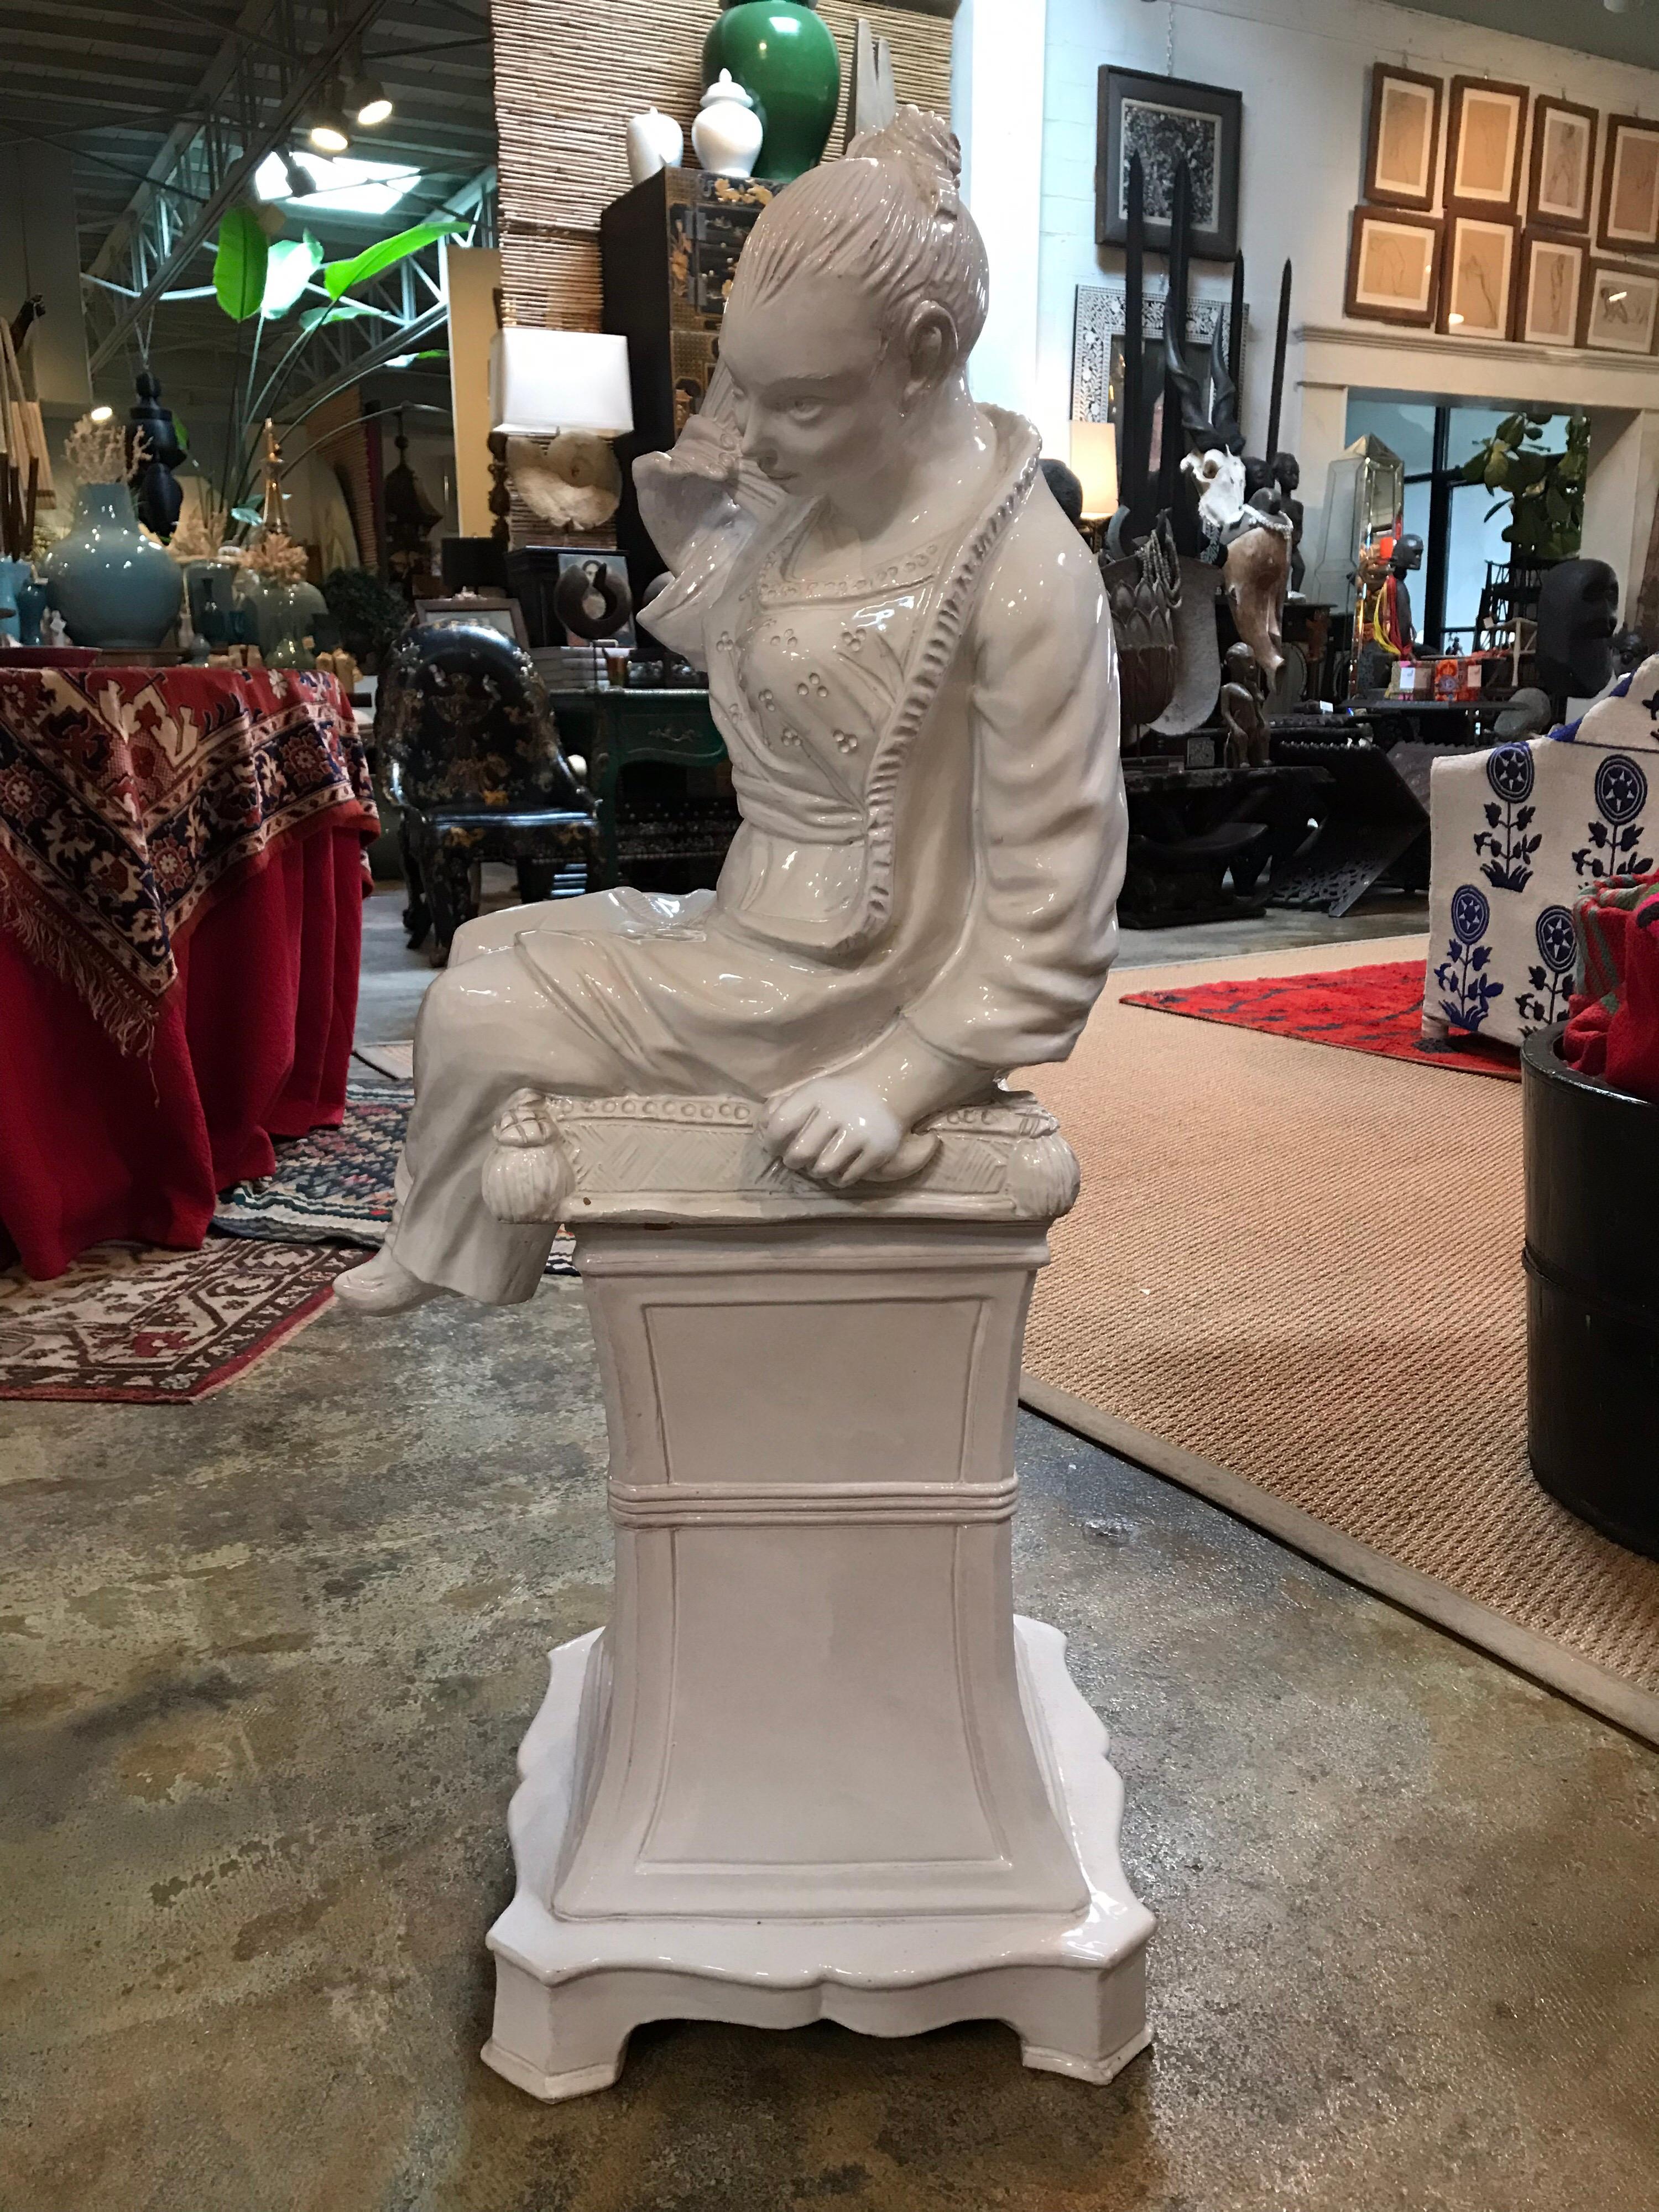 Midcentury 1970s Italian ceramic chinoiserie statue. This white ceramic chinoiserie statue is of a woman shyly fanning herself while looking down from her pedestal. The white luster of the ceramic surface grabs your attention, while the detail of